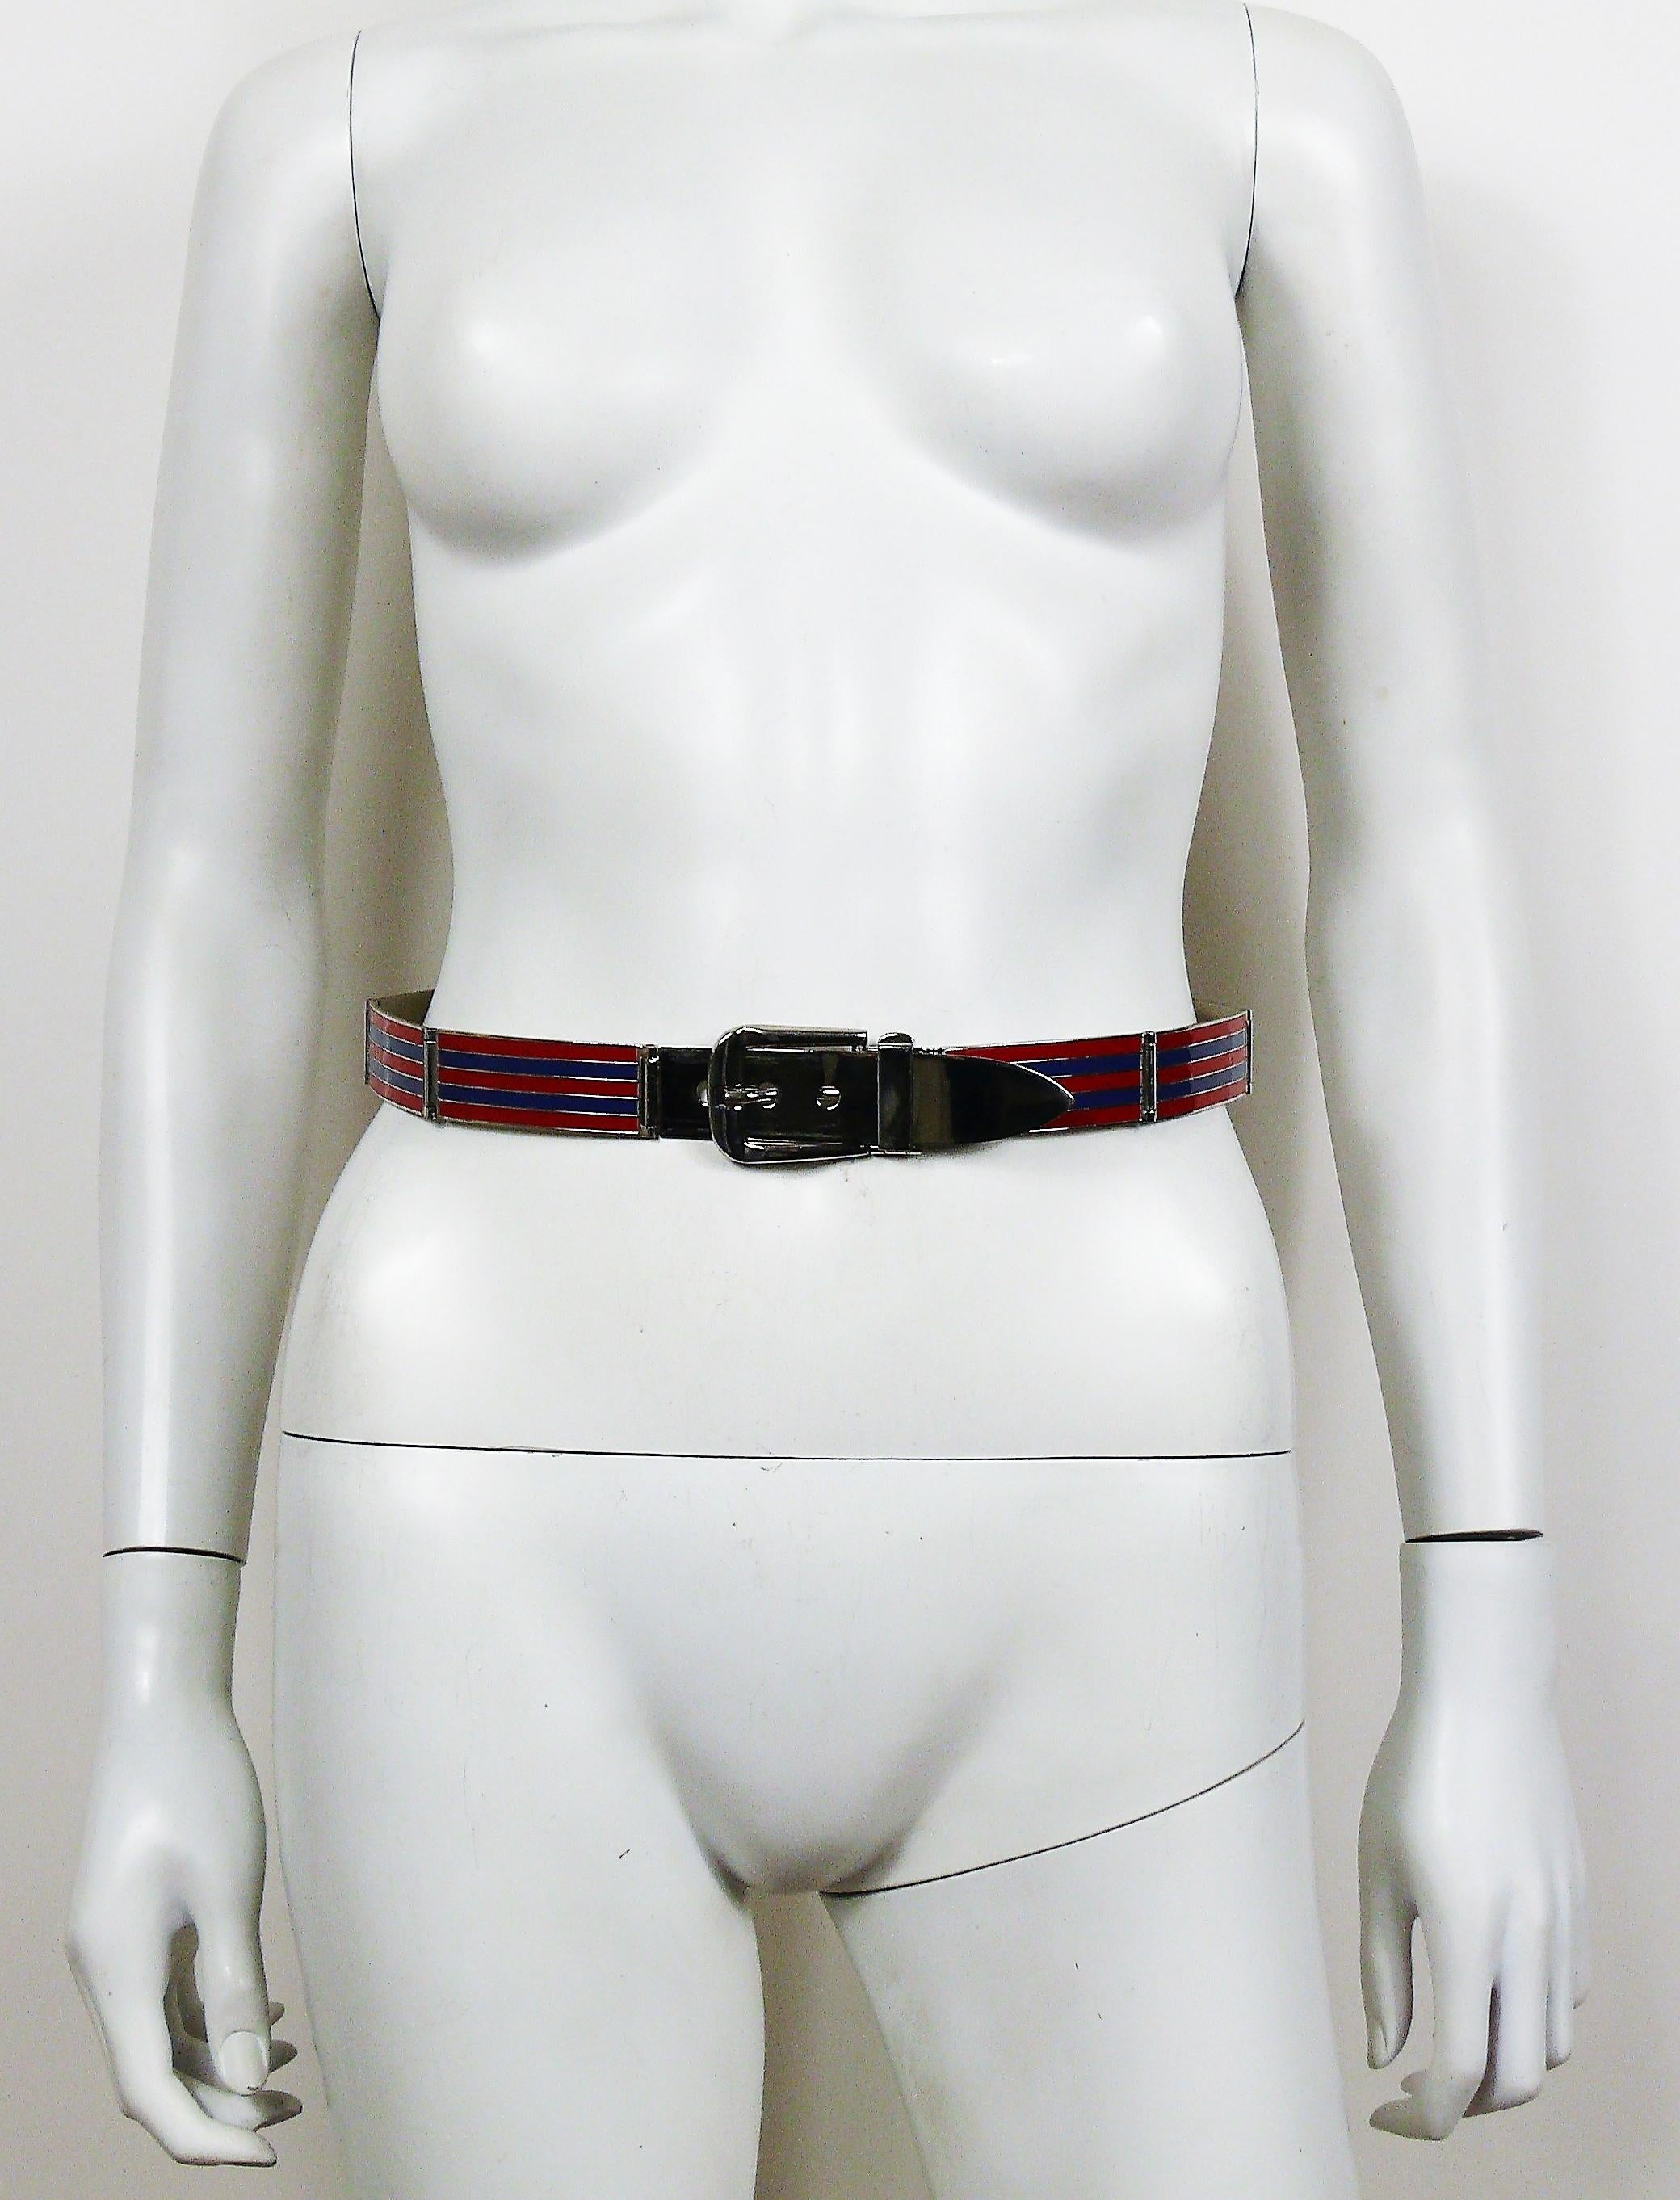 GUCCI vintage silver toned belt featuring articulated links with blue and red enamel pattern.

Secure clasp closure system.

Embossed GUCCI ITALY.

Indicative measurements : adjustable length from approx 67.5 cm (26.57 inches) to approx. 72.5 cm